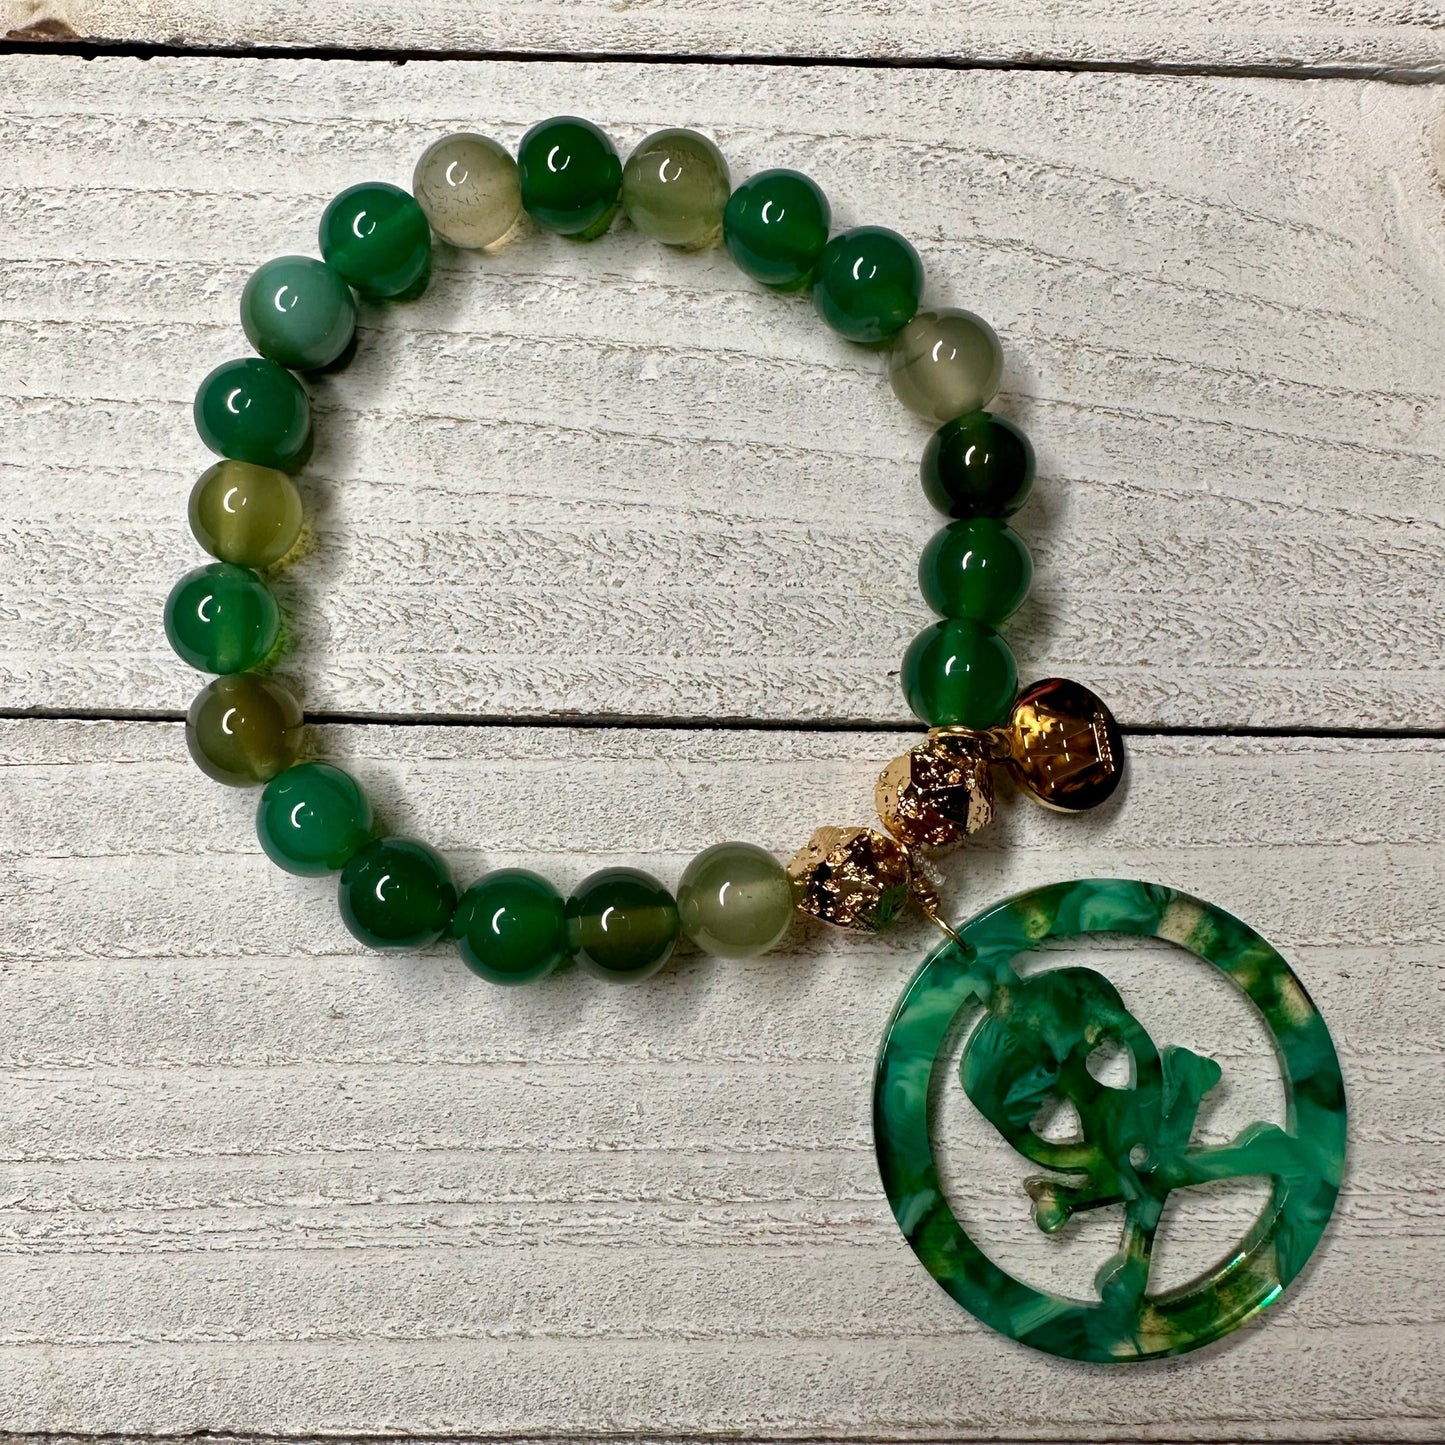 Green 6mm Agate Beads Bracelet with an acetate crossbones and skull charm